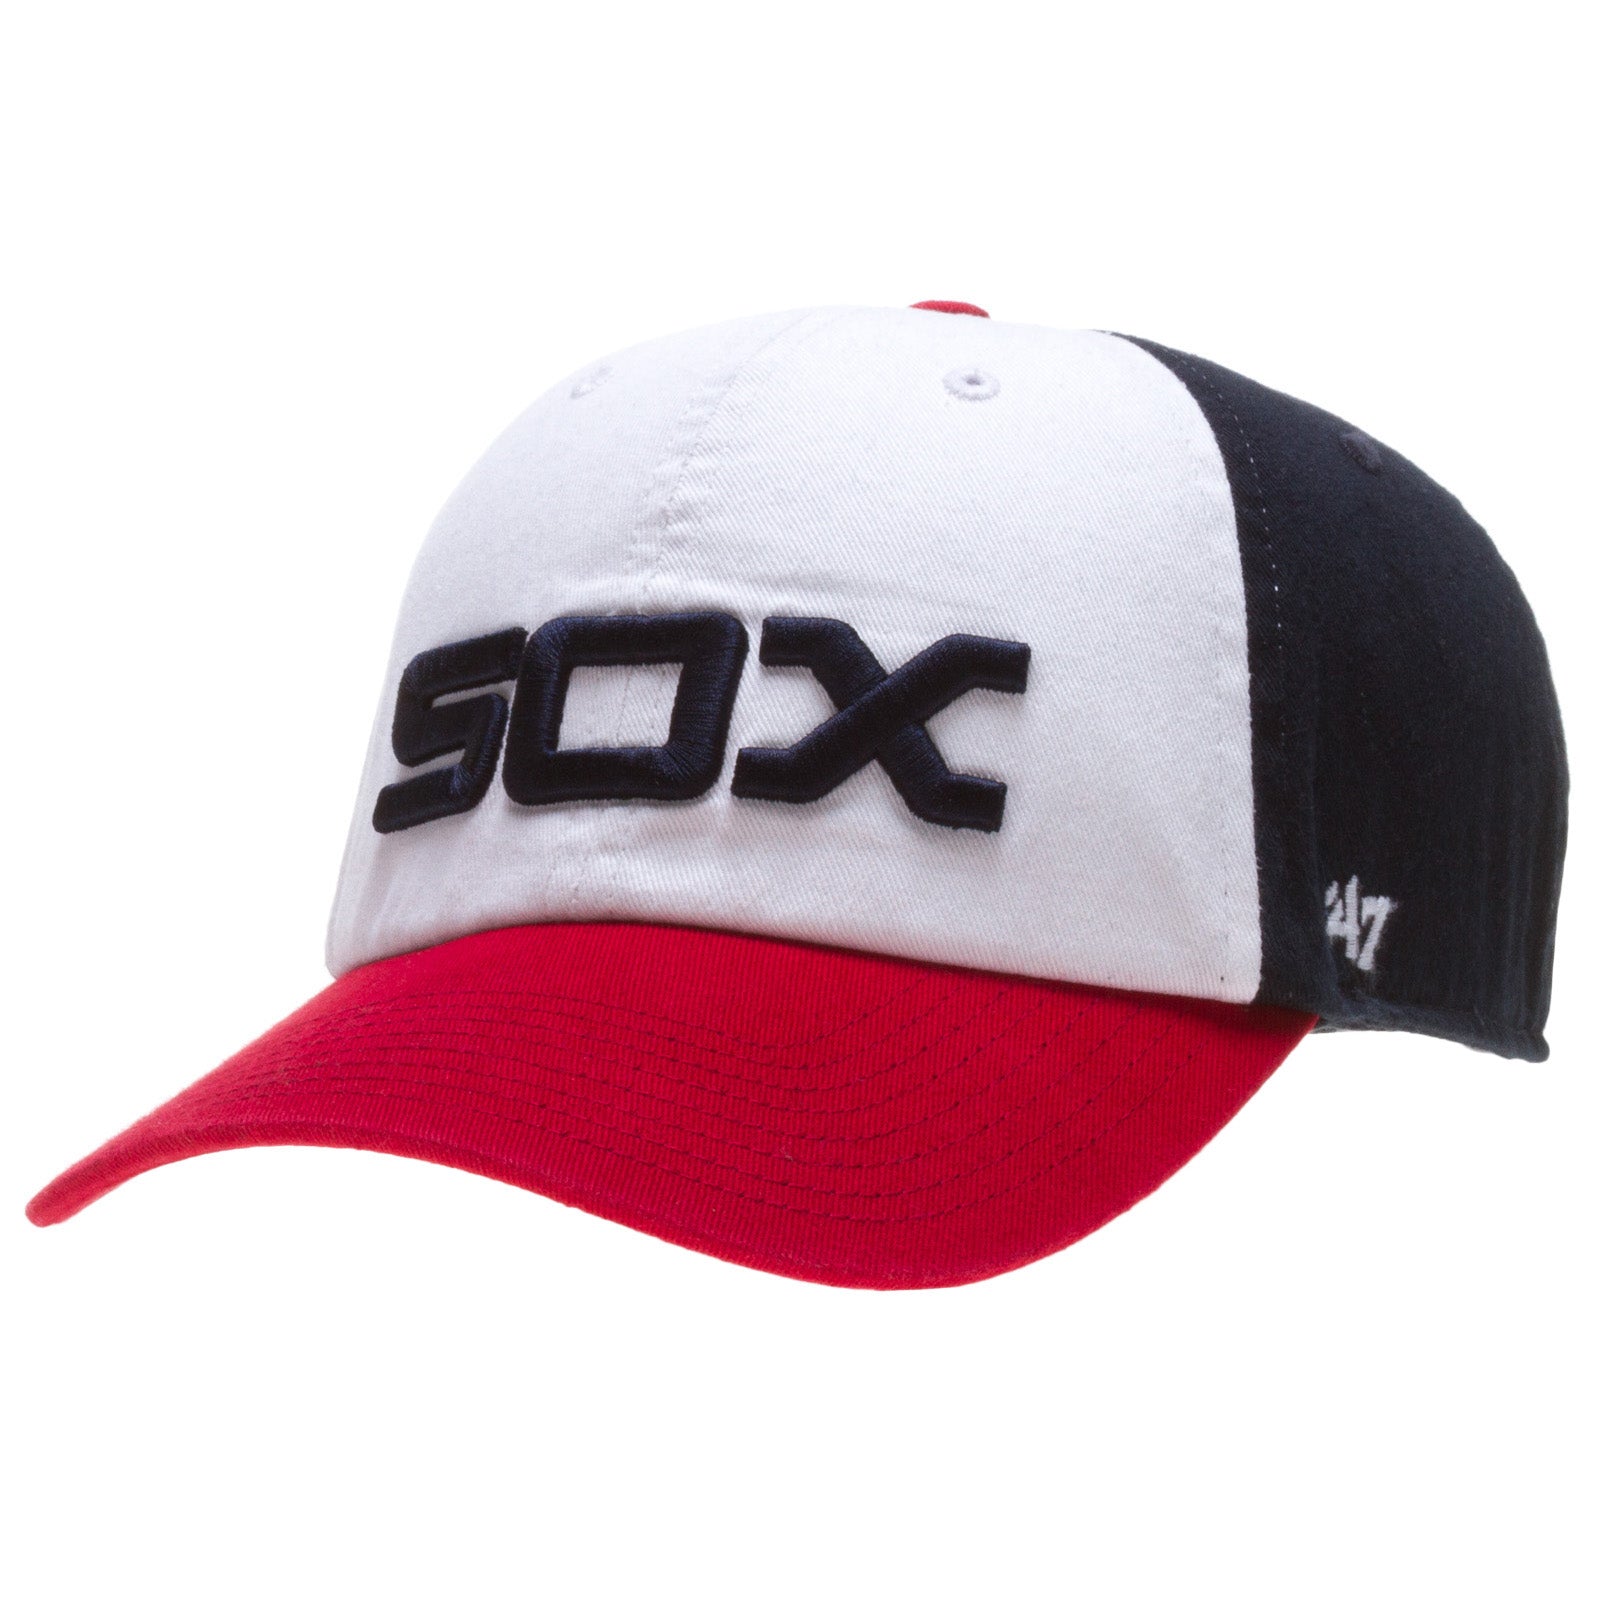 Chicago White Sox on X: 𝗦𝗼𝘂𝘁𝗵𝘀𝗶𝗱𝗲 𝗦𝘄𝗮𝗴. A look built